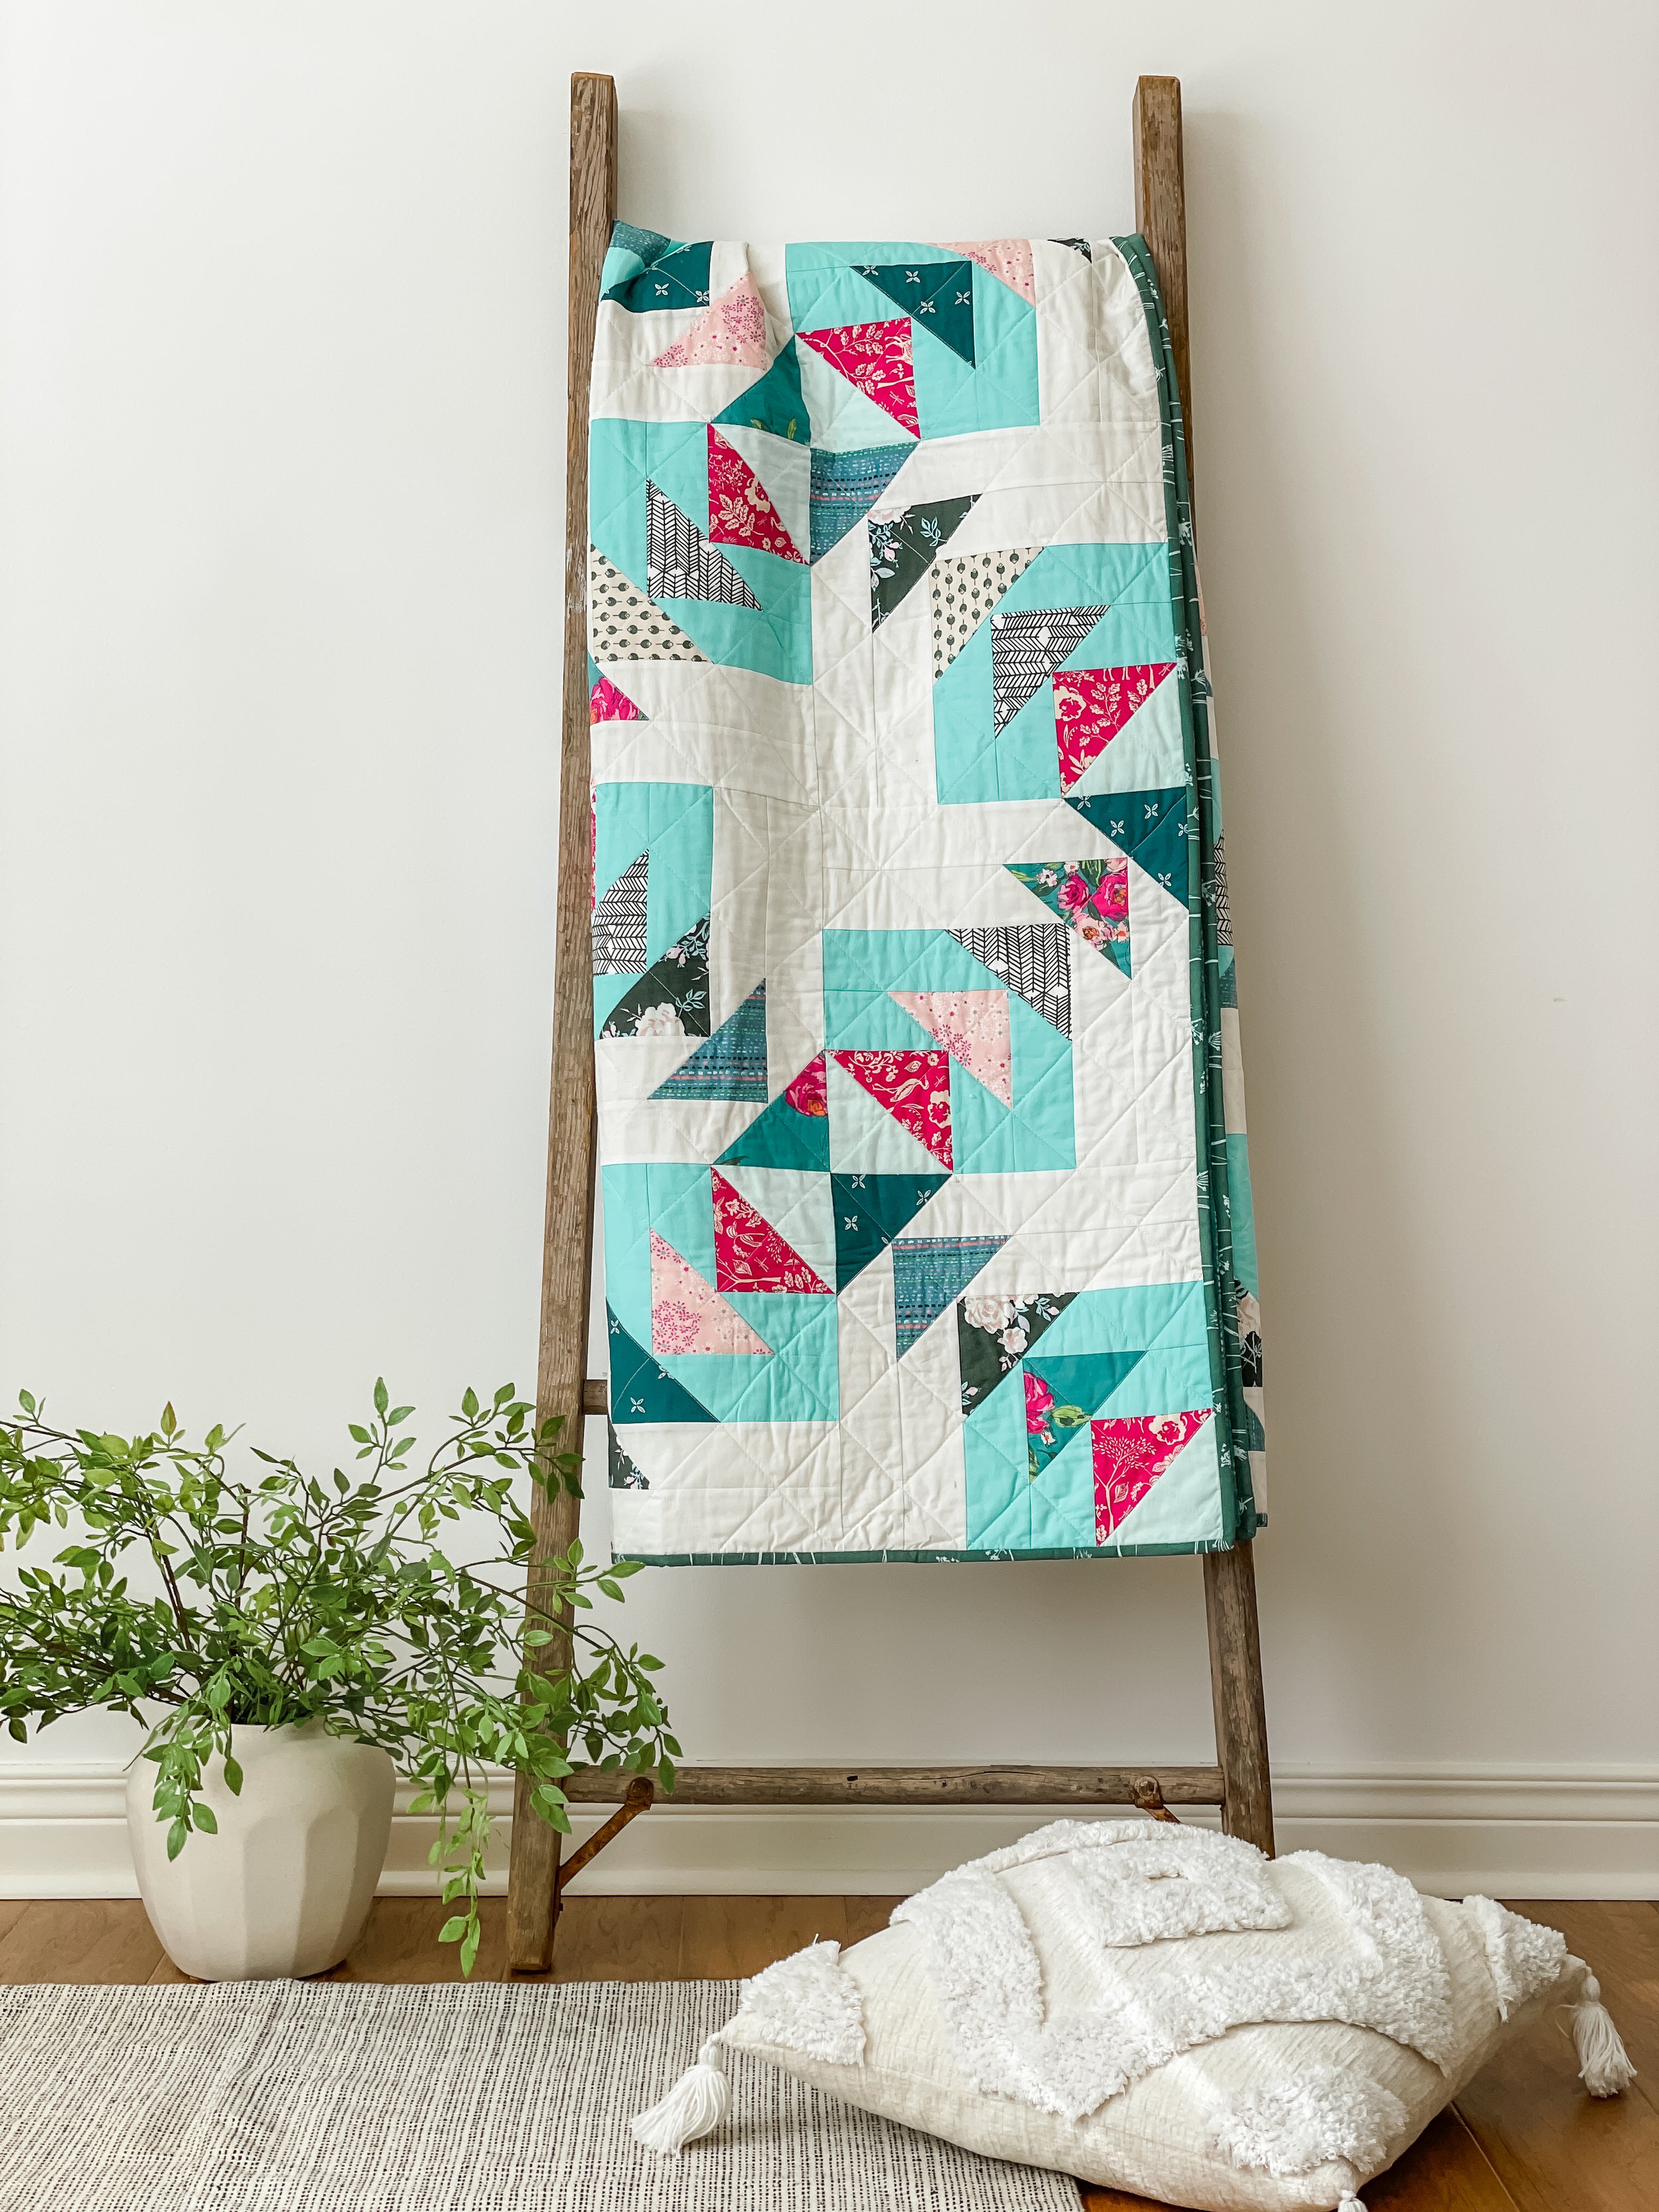 What Batting is Right for your Quilt! • Victoria Sunshine Studio